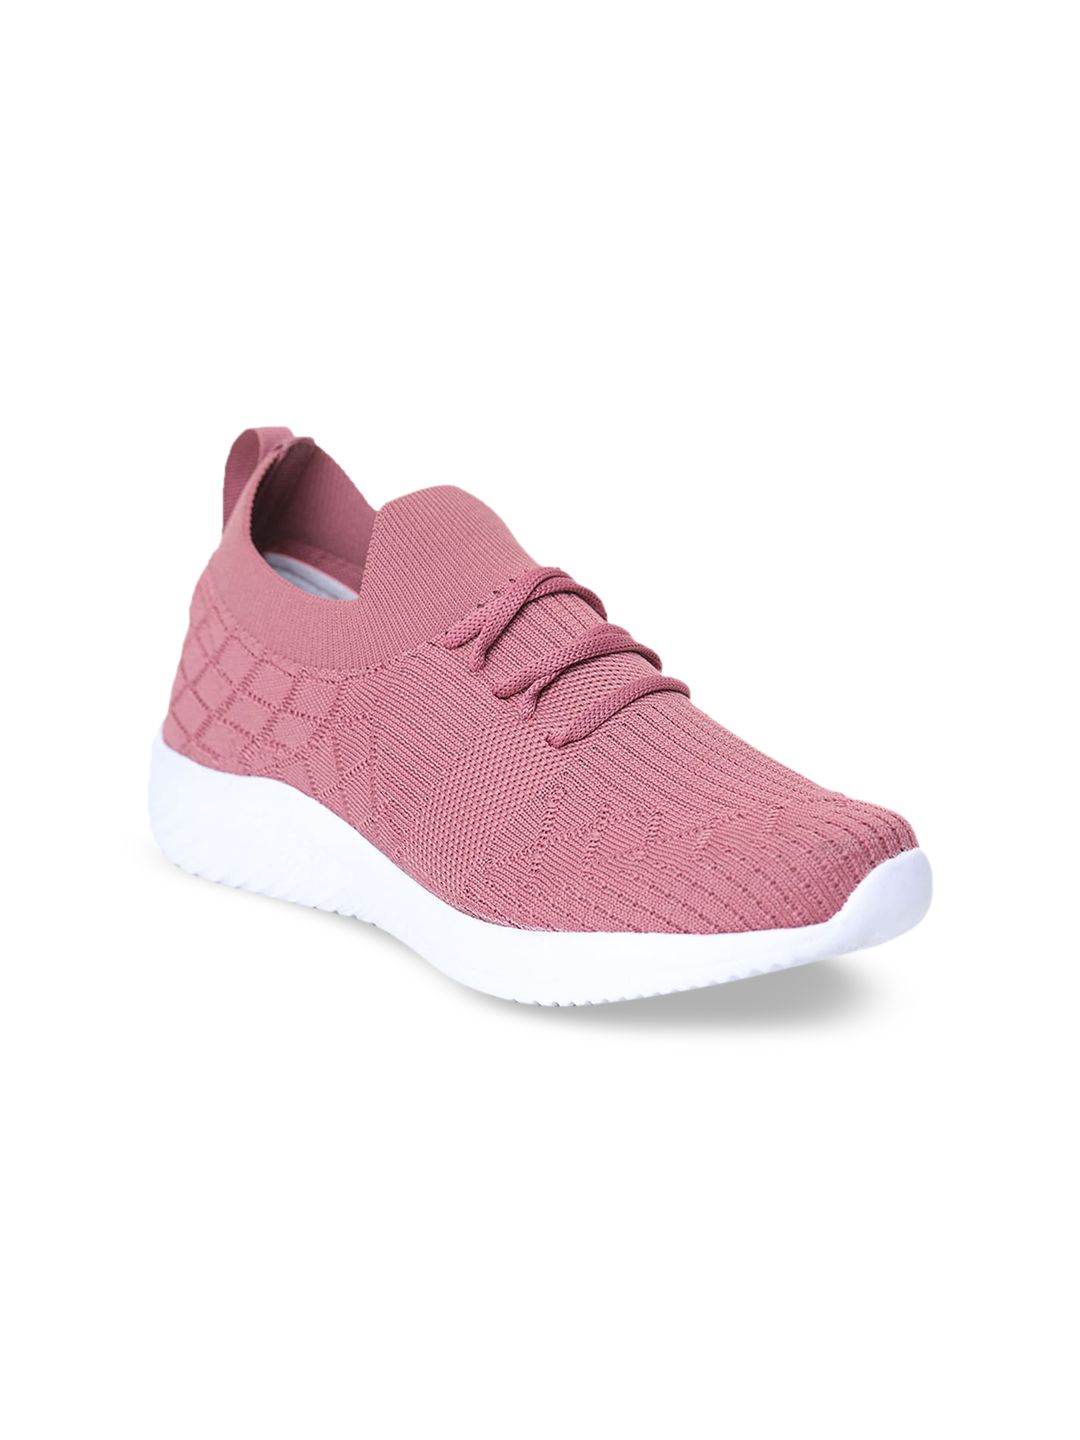 TRASE Women Pink Woven Design Sneakers Price in India